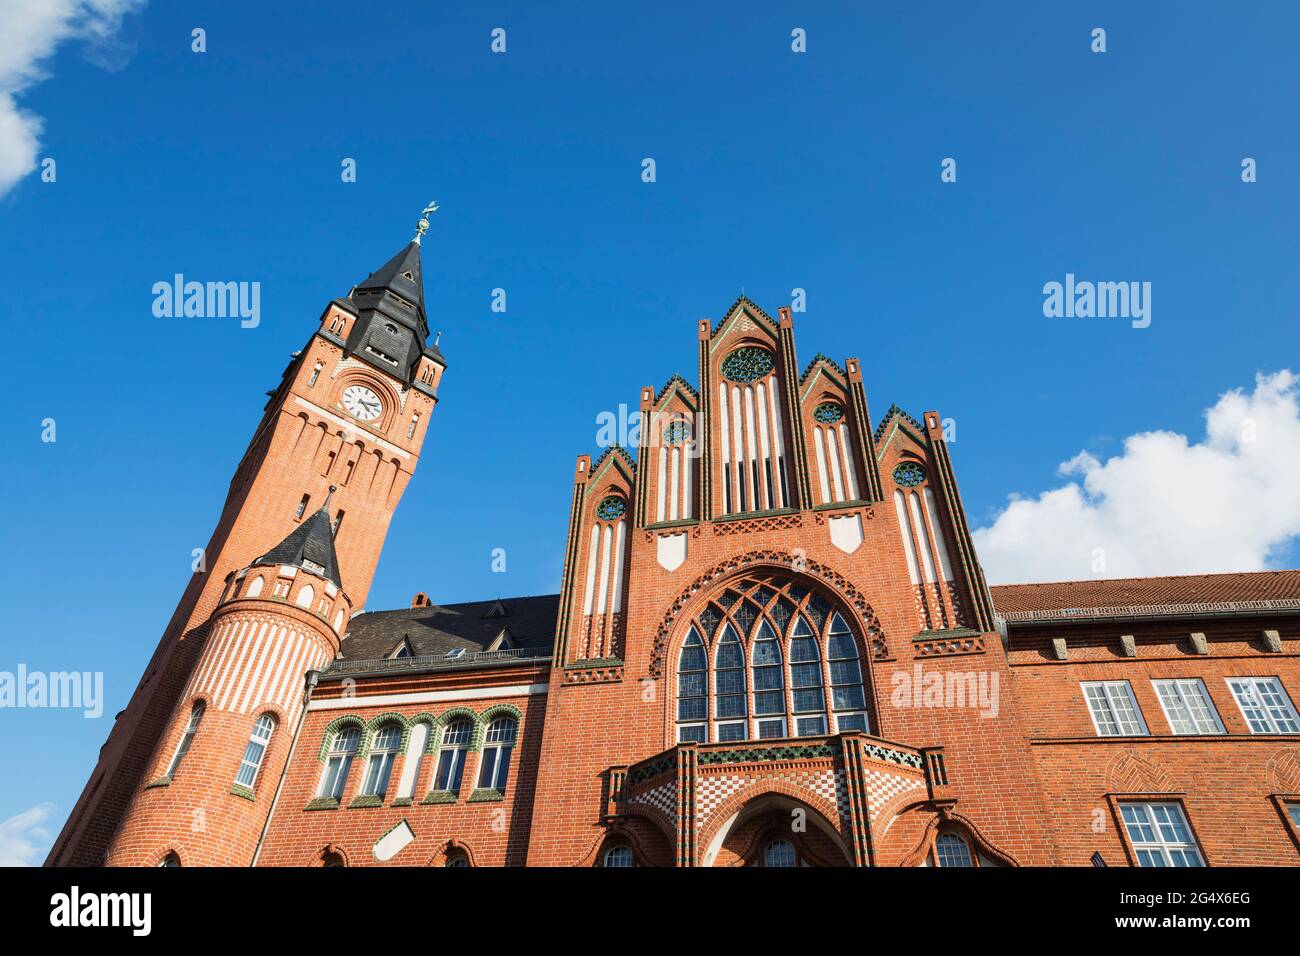 Germany, Berlin, Low angle view of Rathaus Kopenick Stock Photo